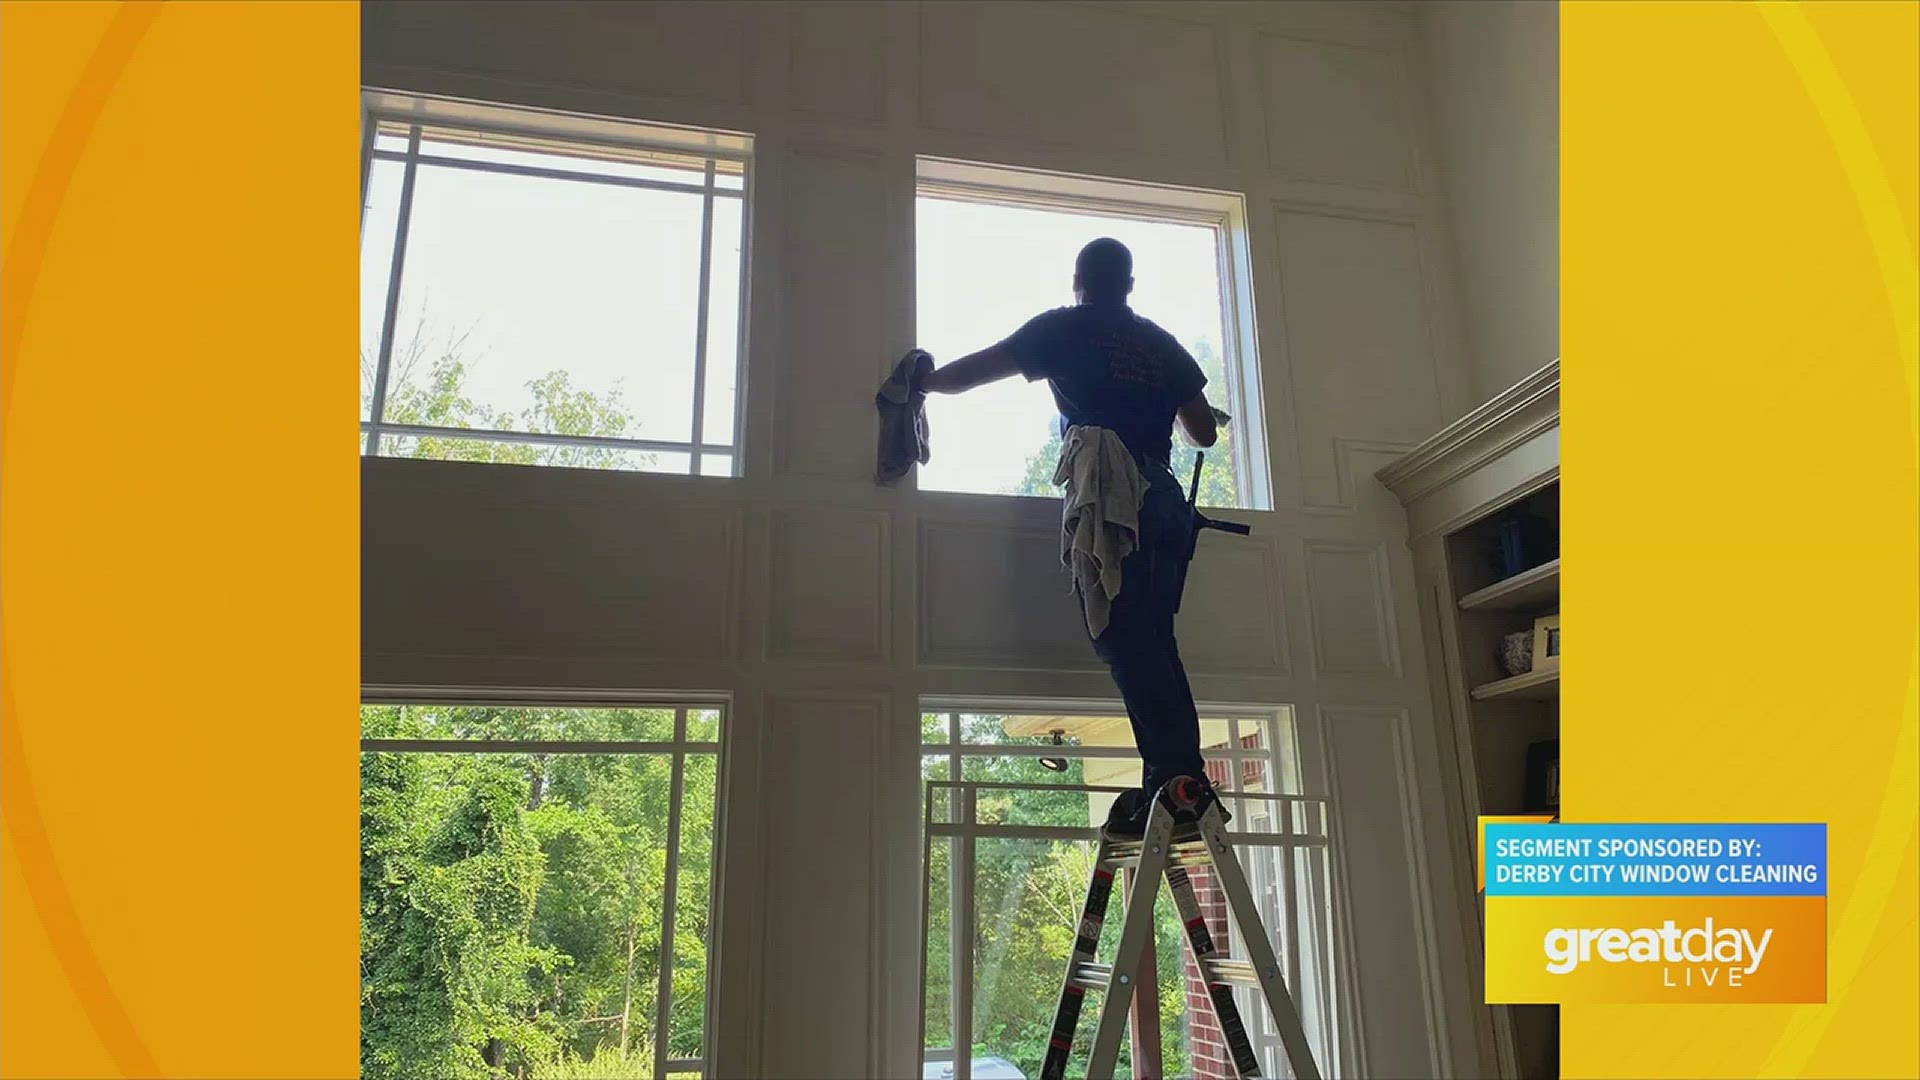 Derby City Window Cleaning LLC offers services in window and gutter cleaning.